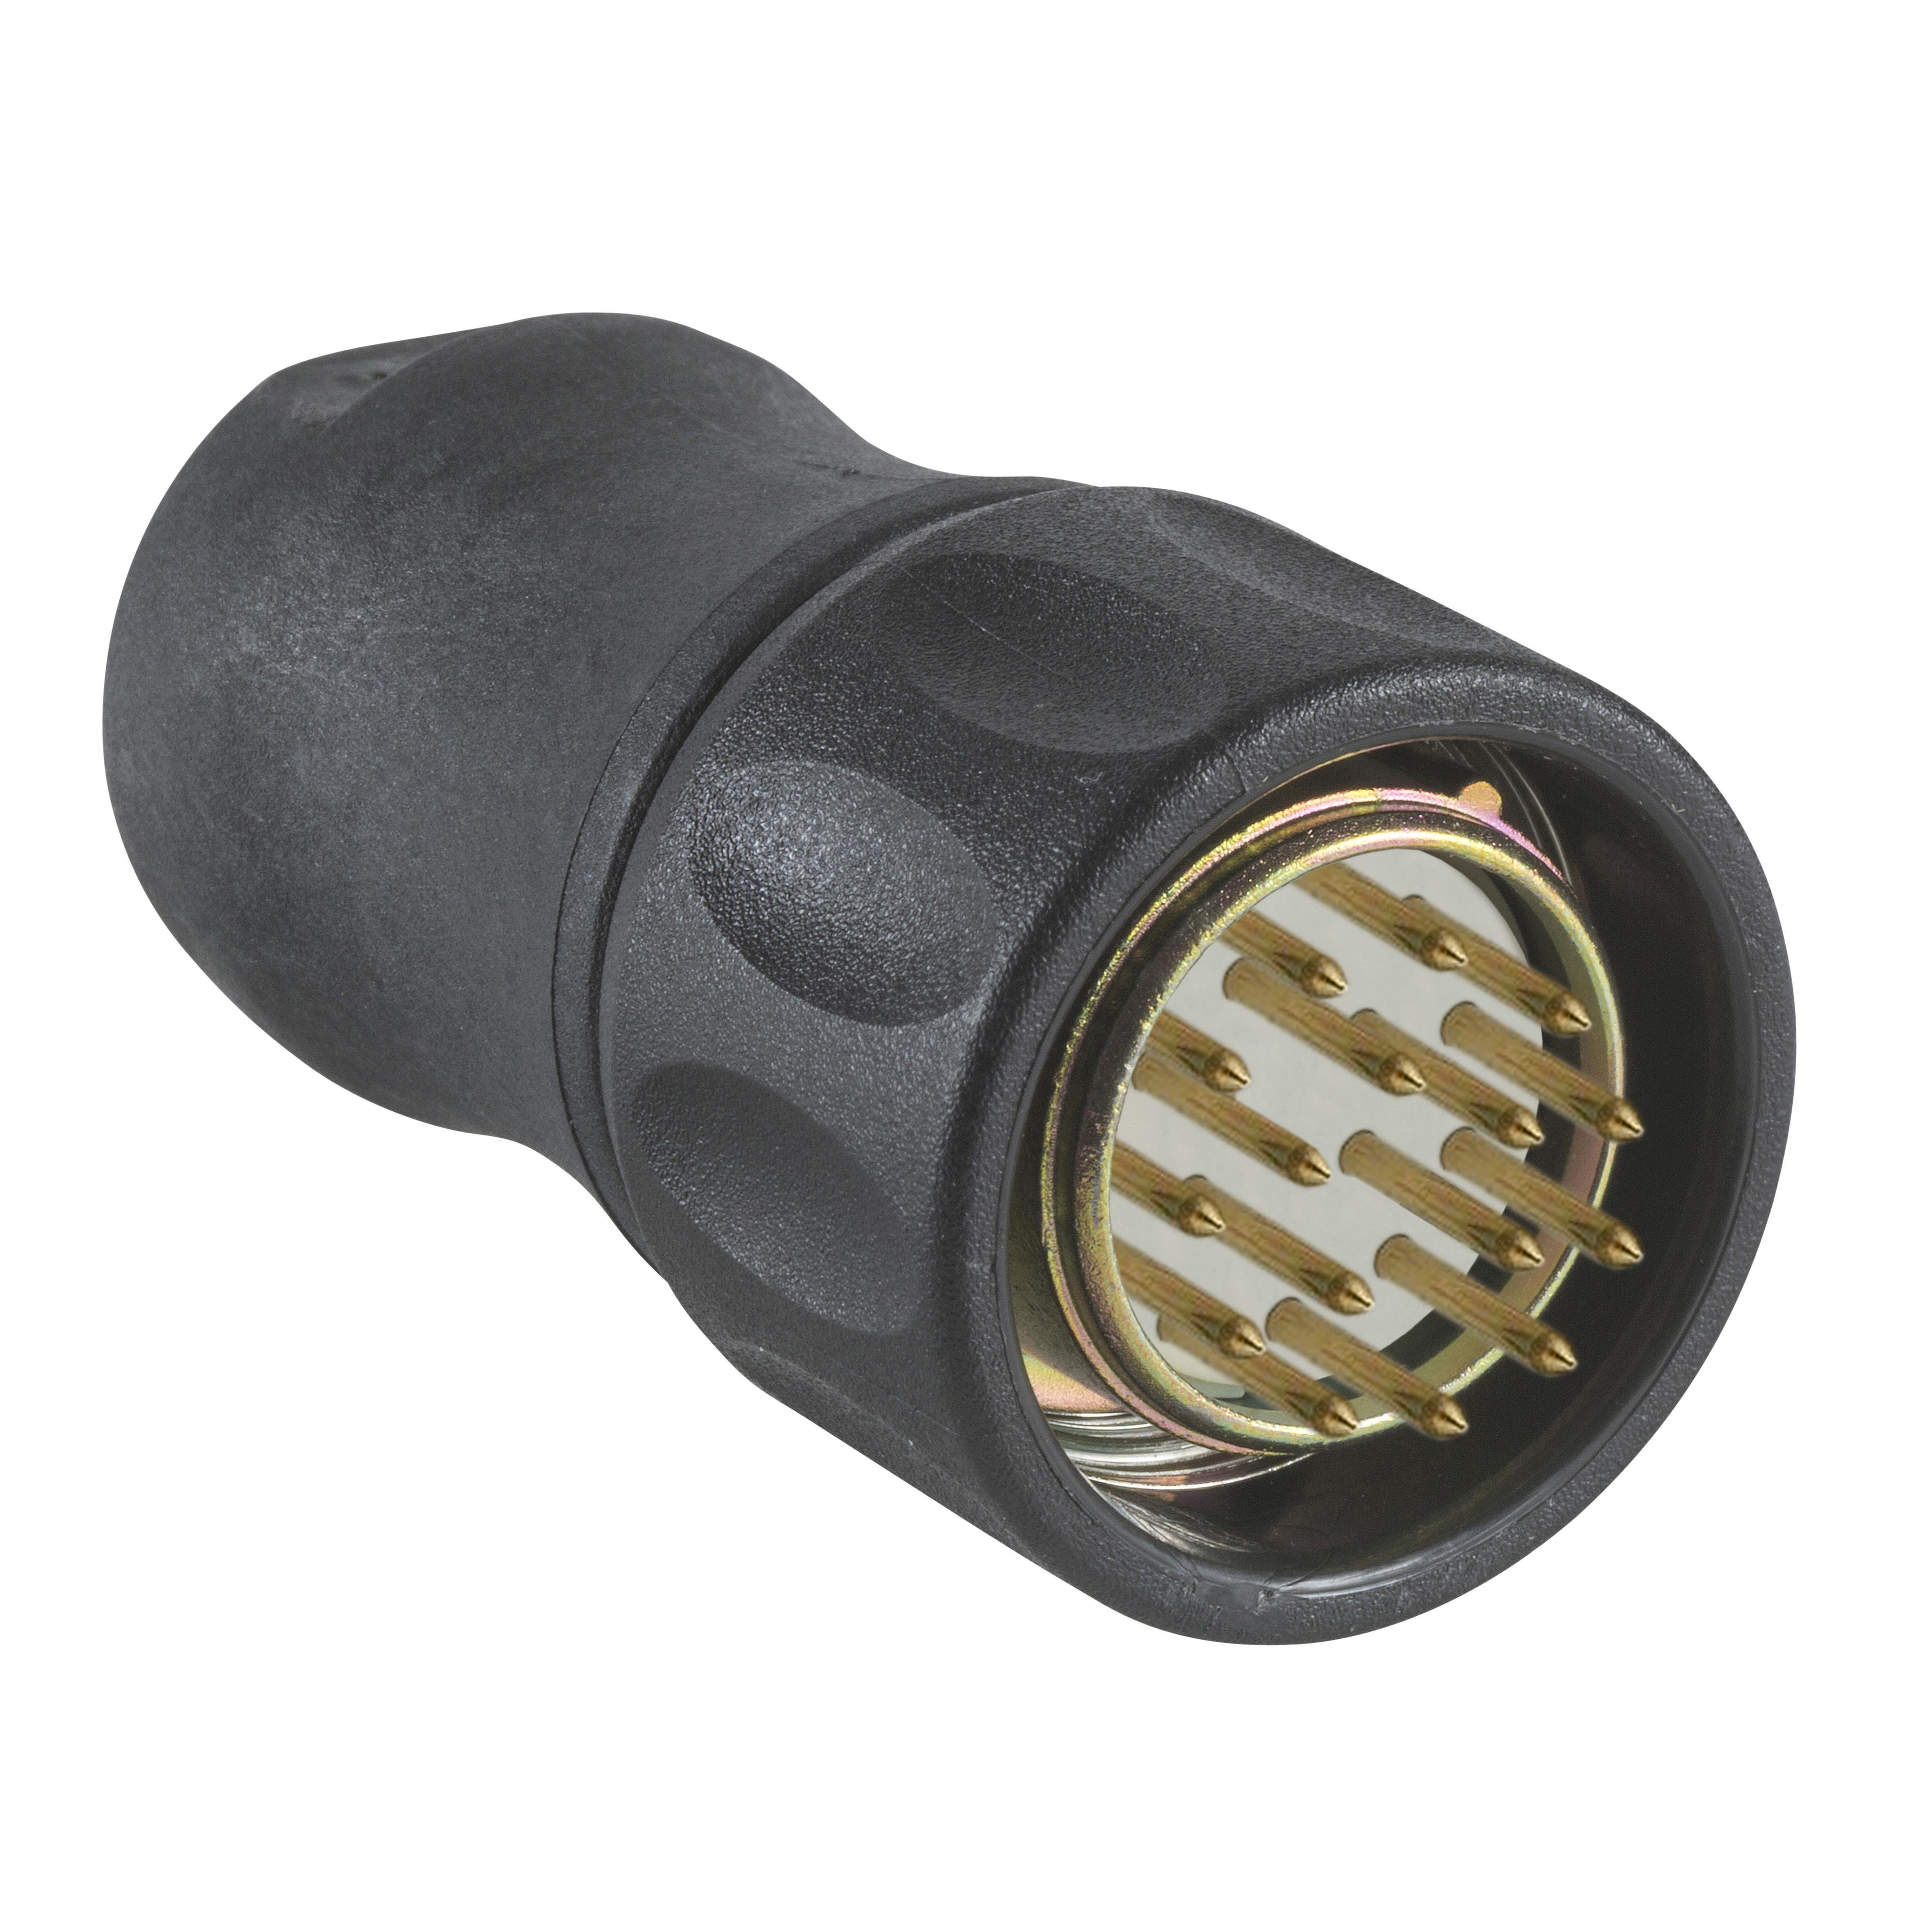 【XZCC23FDP160S】CONNECTOR M23 F STRAIGHT 16 PINS